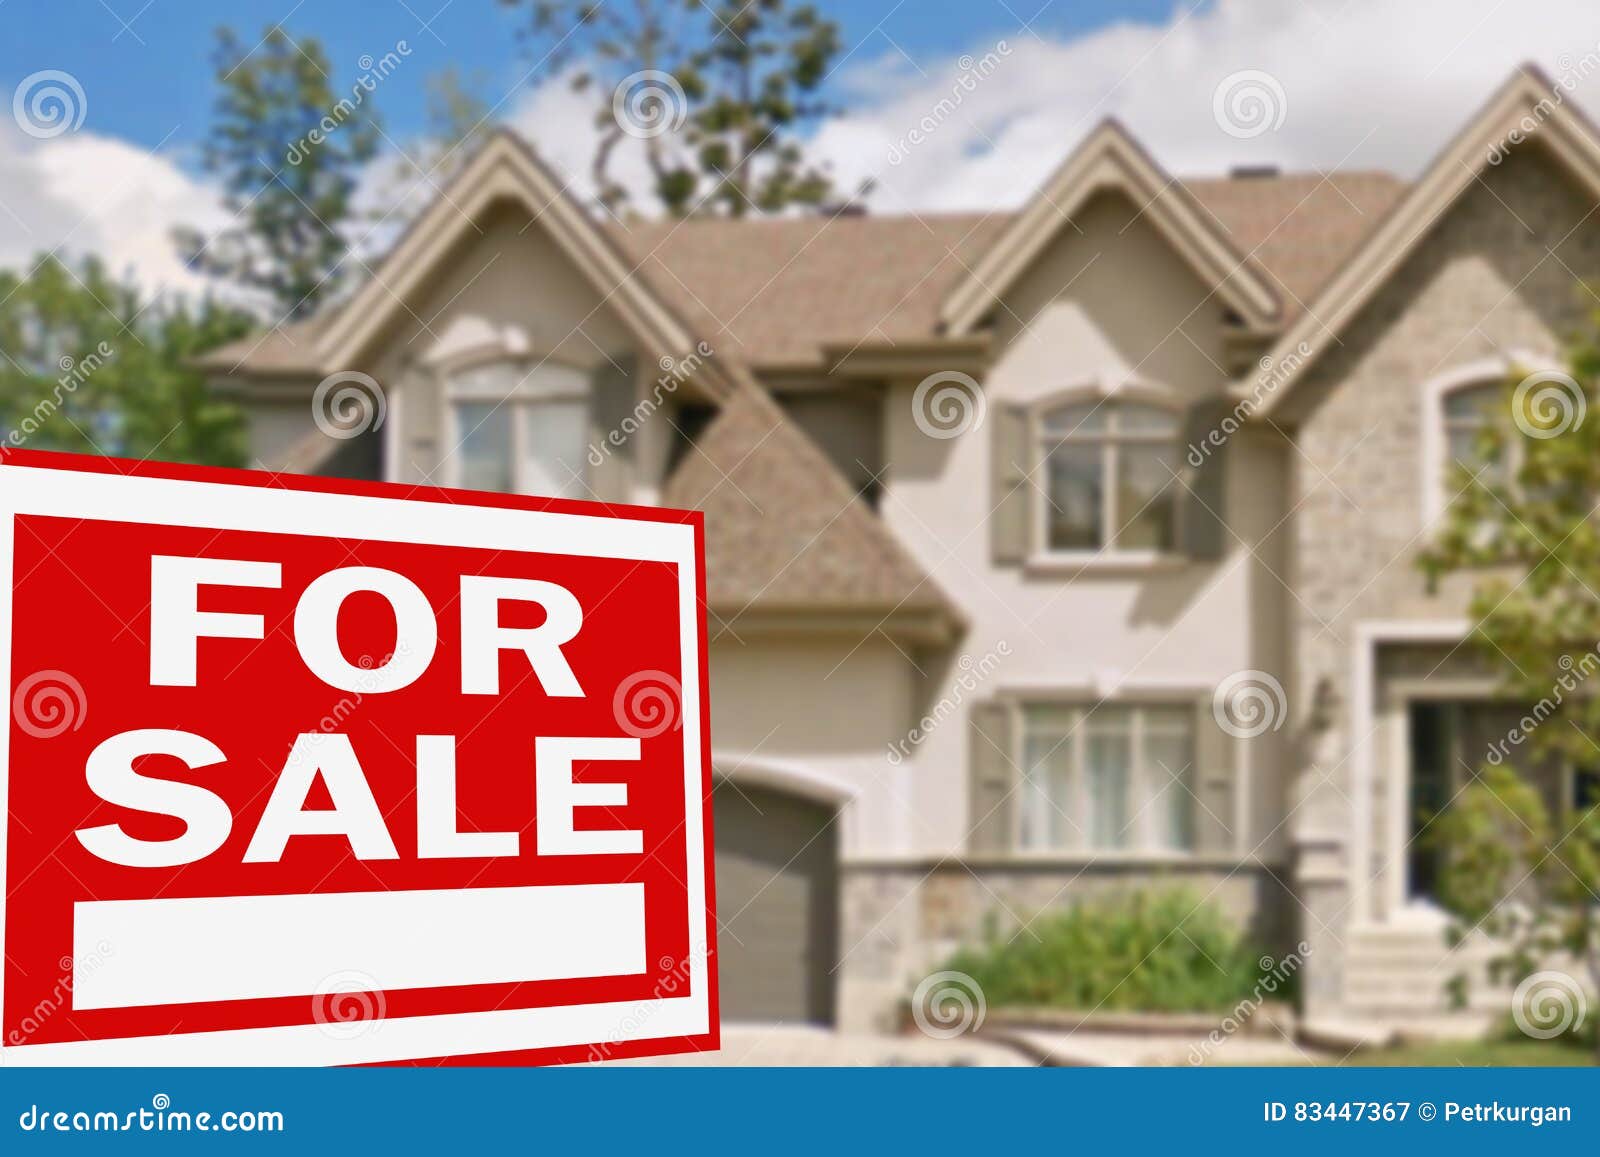 Home for sale. Sign stock image. Image of advertising - 83447367